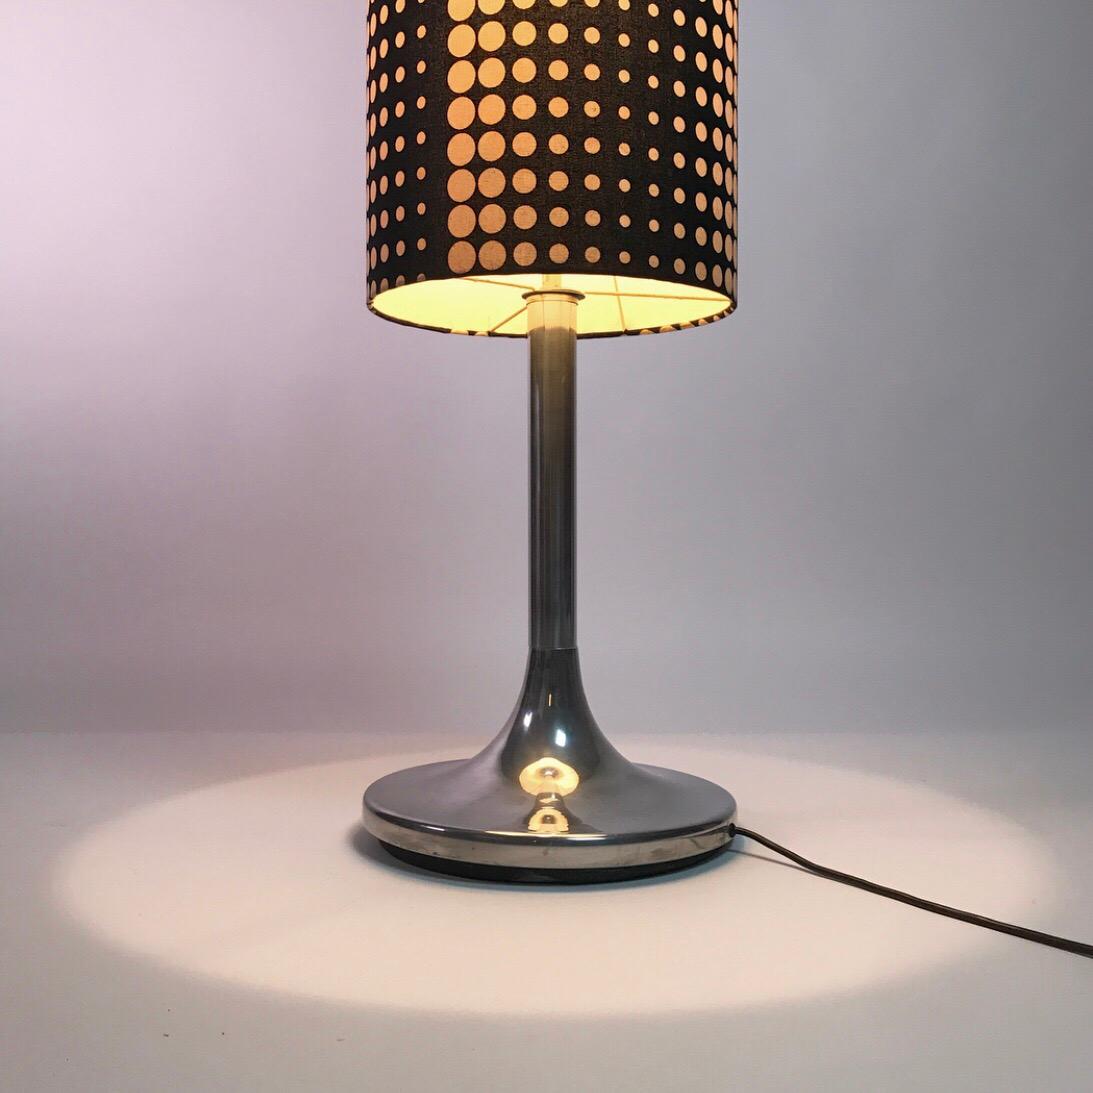 Late 20th Century Elegant German Space Age Floor Lamp by Kaiser Leuchten, Germany 1970s For Sale